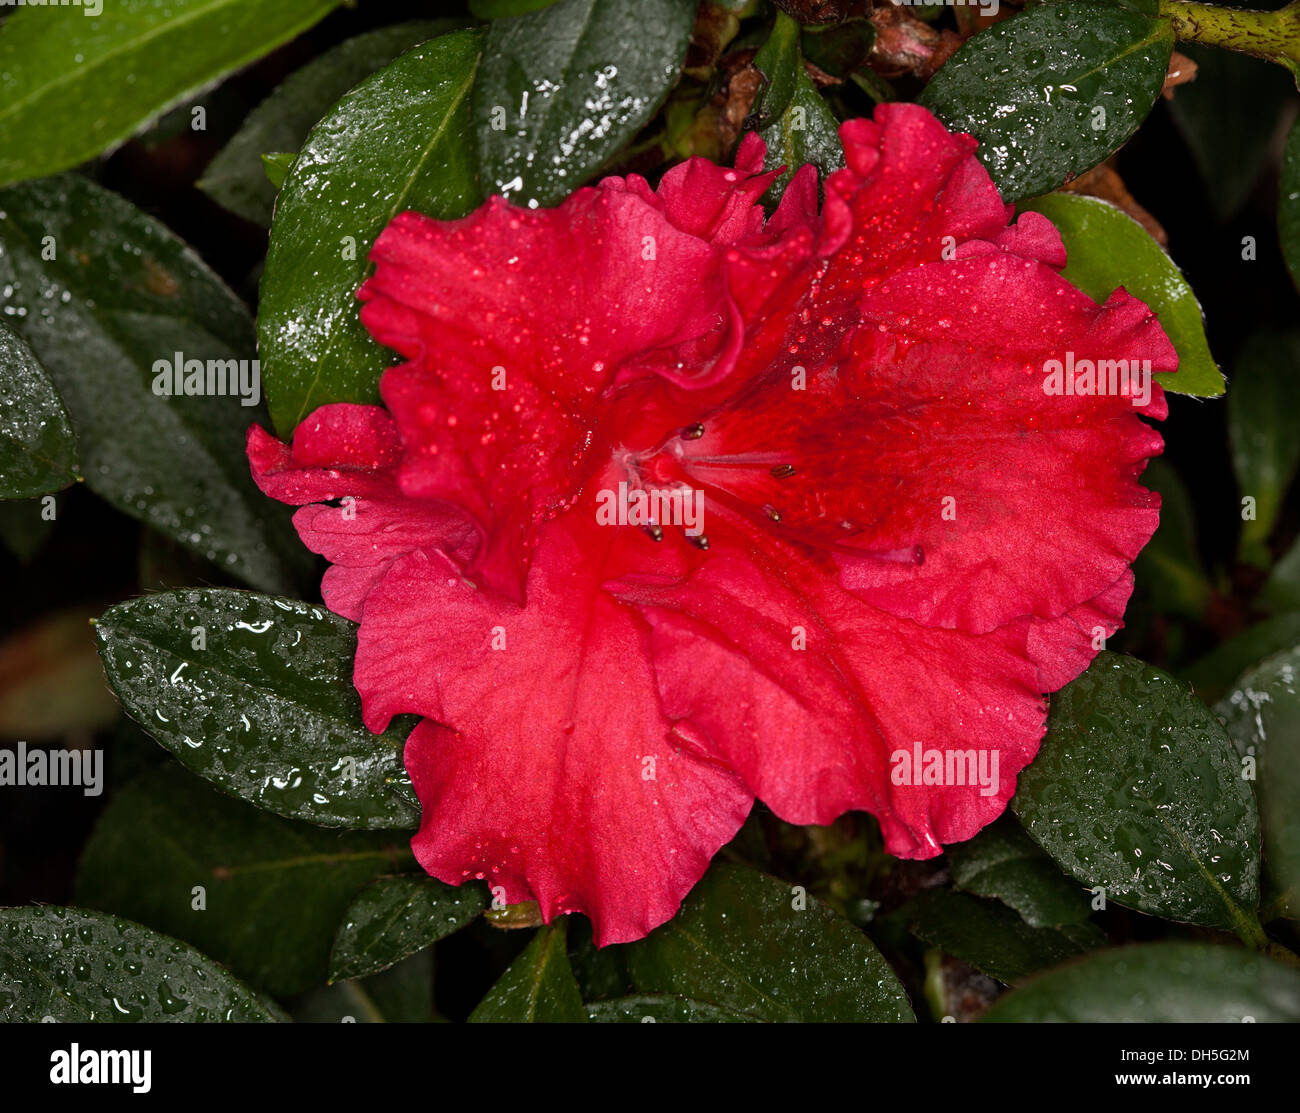 Bright magenta red flower of Azalea indica 'Red Wing' and dark green foliage with raindrops on leaves Stock Photo